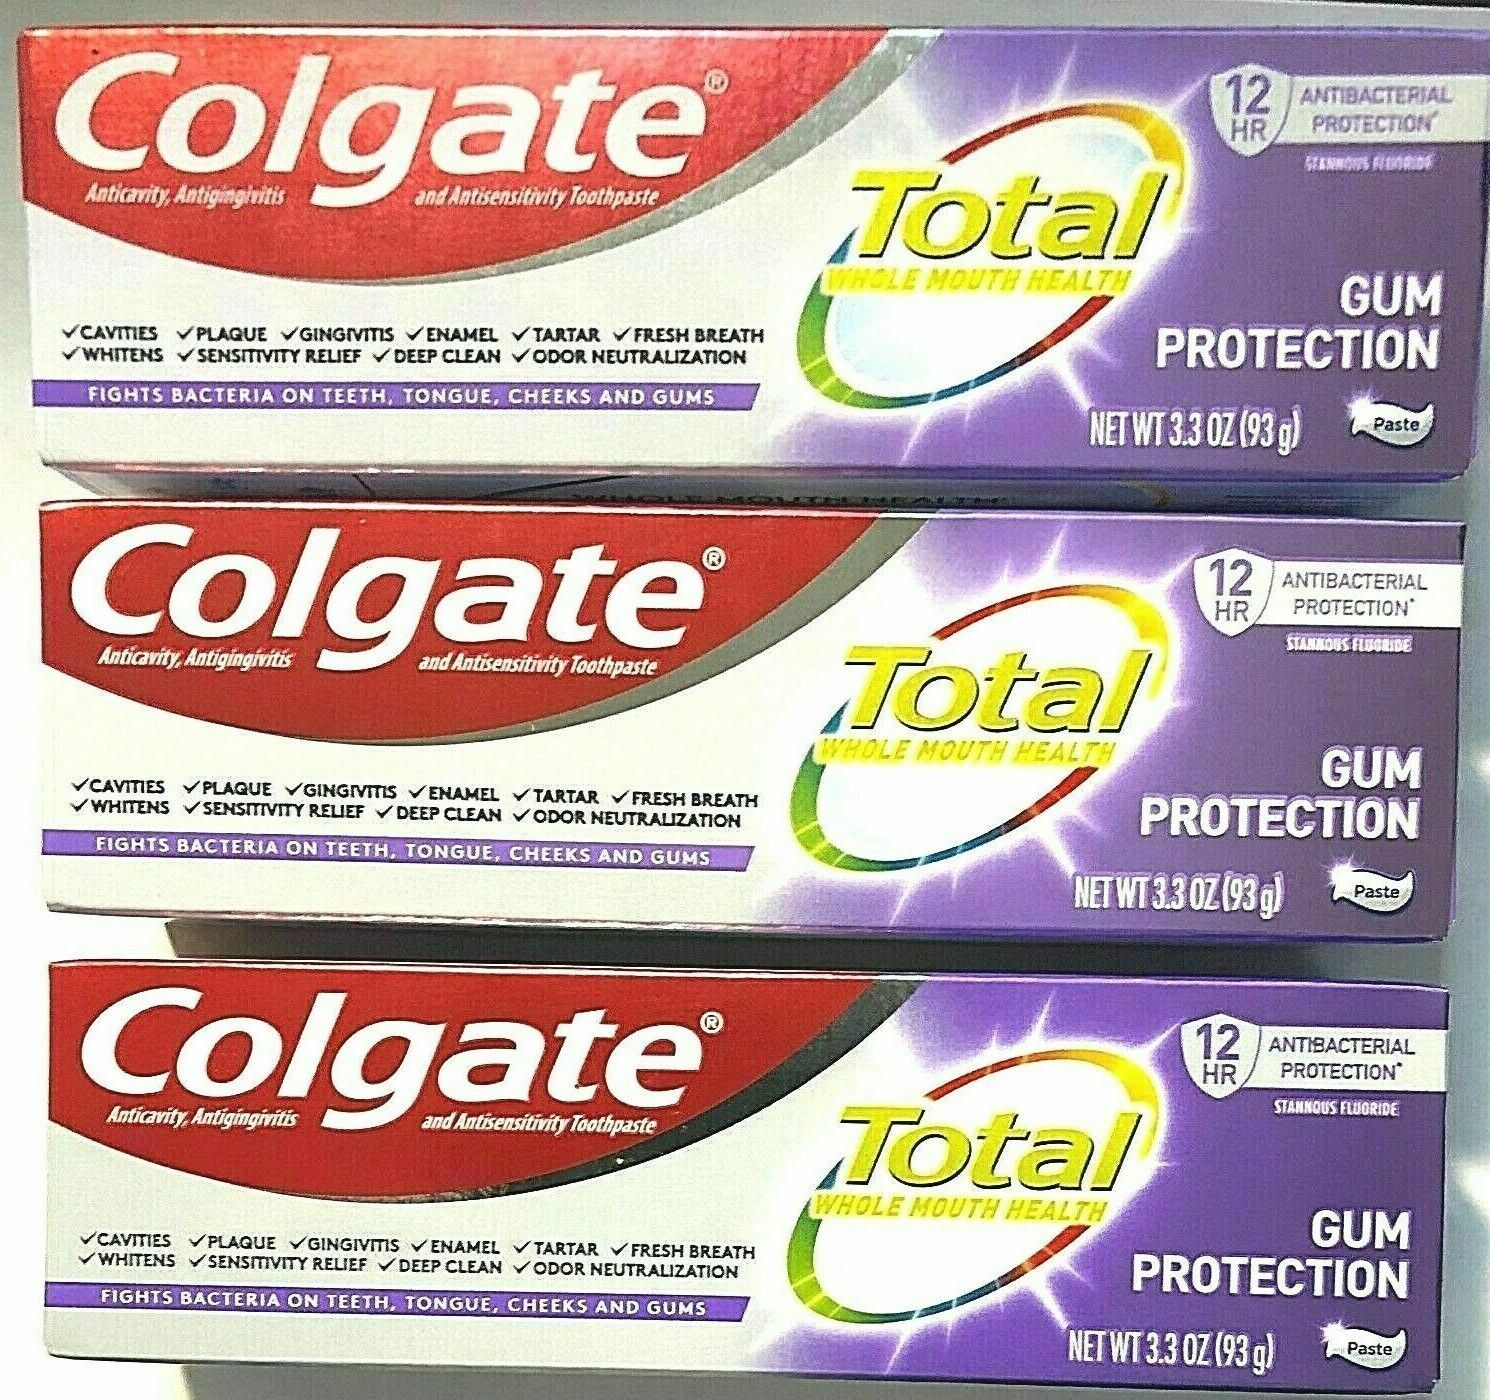 Lot of 3 Colgate Total Wh Mouth Health Gum Protection Antibacterial 3.3 Oz - $14.99